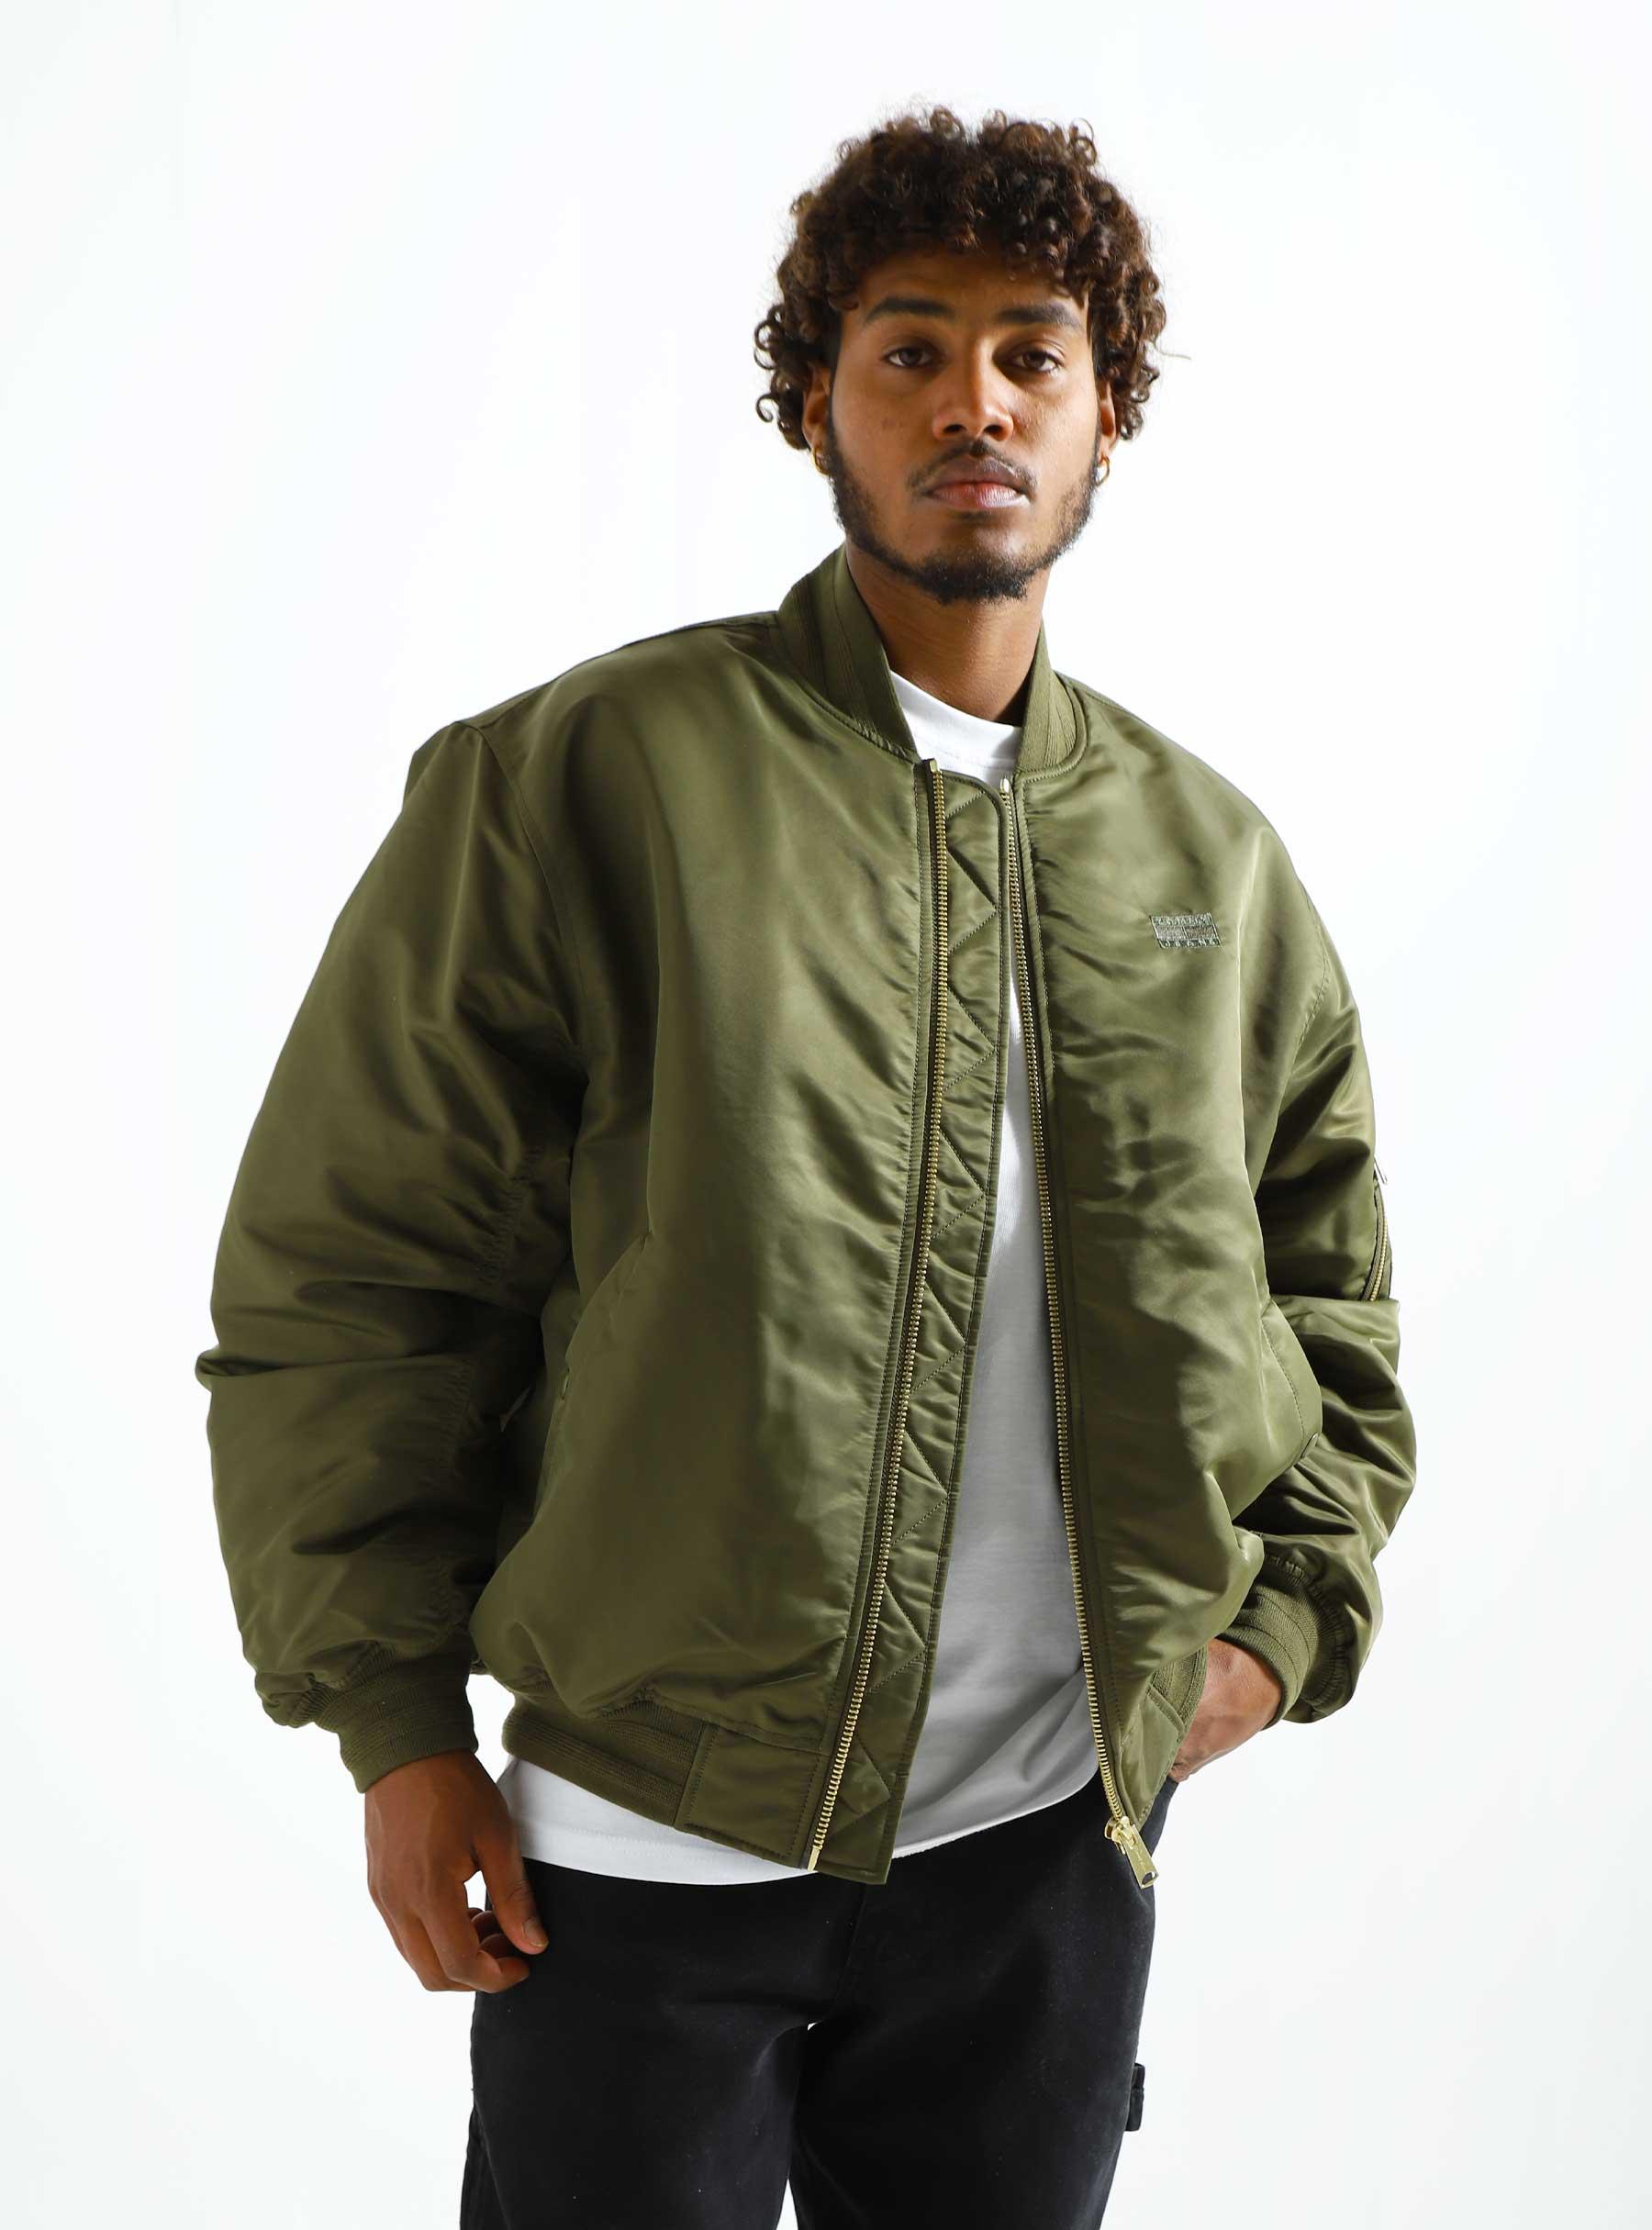 Tommy Jeans TJM Authentic Army Jacket Drab Olive Green - Freshcotton